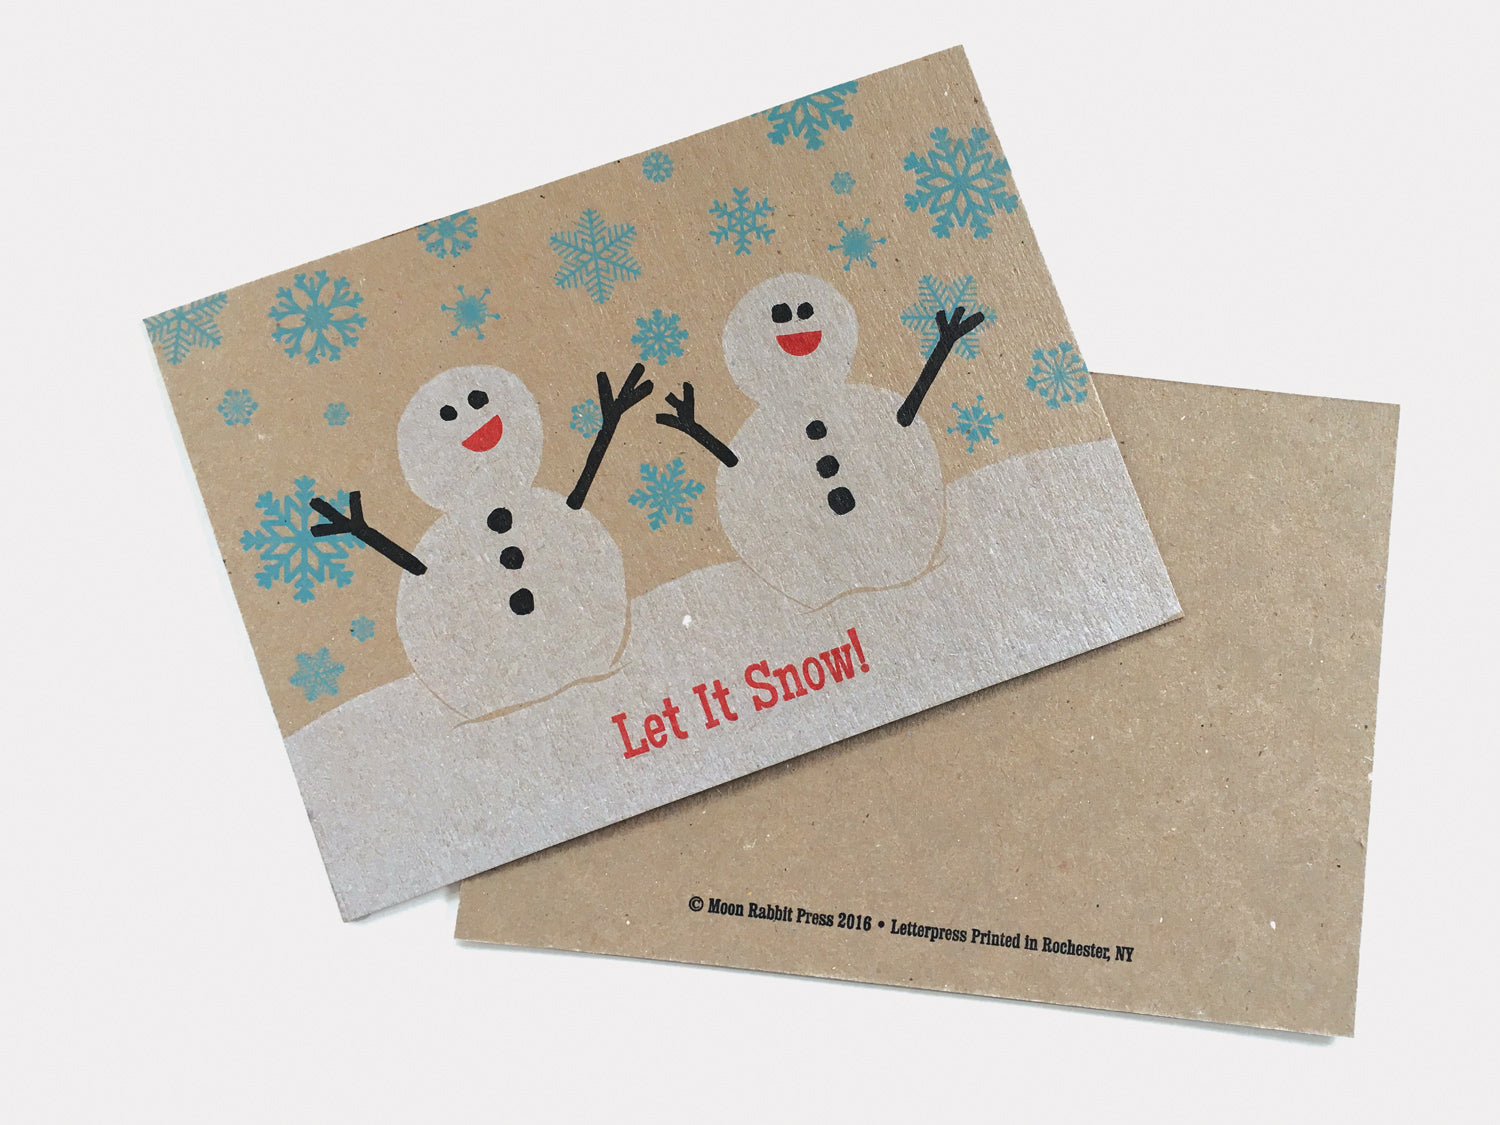 snowman let it snow letterpress holiday card printed in Rochester NY